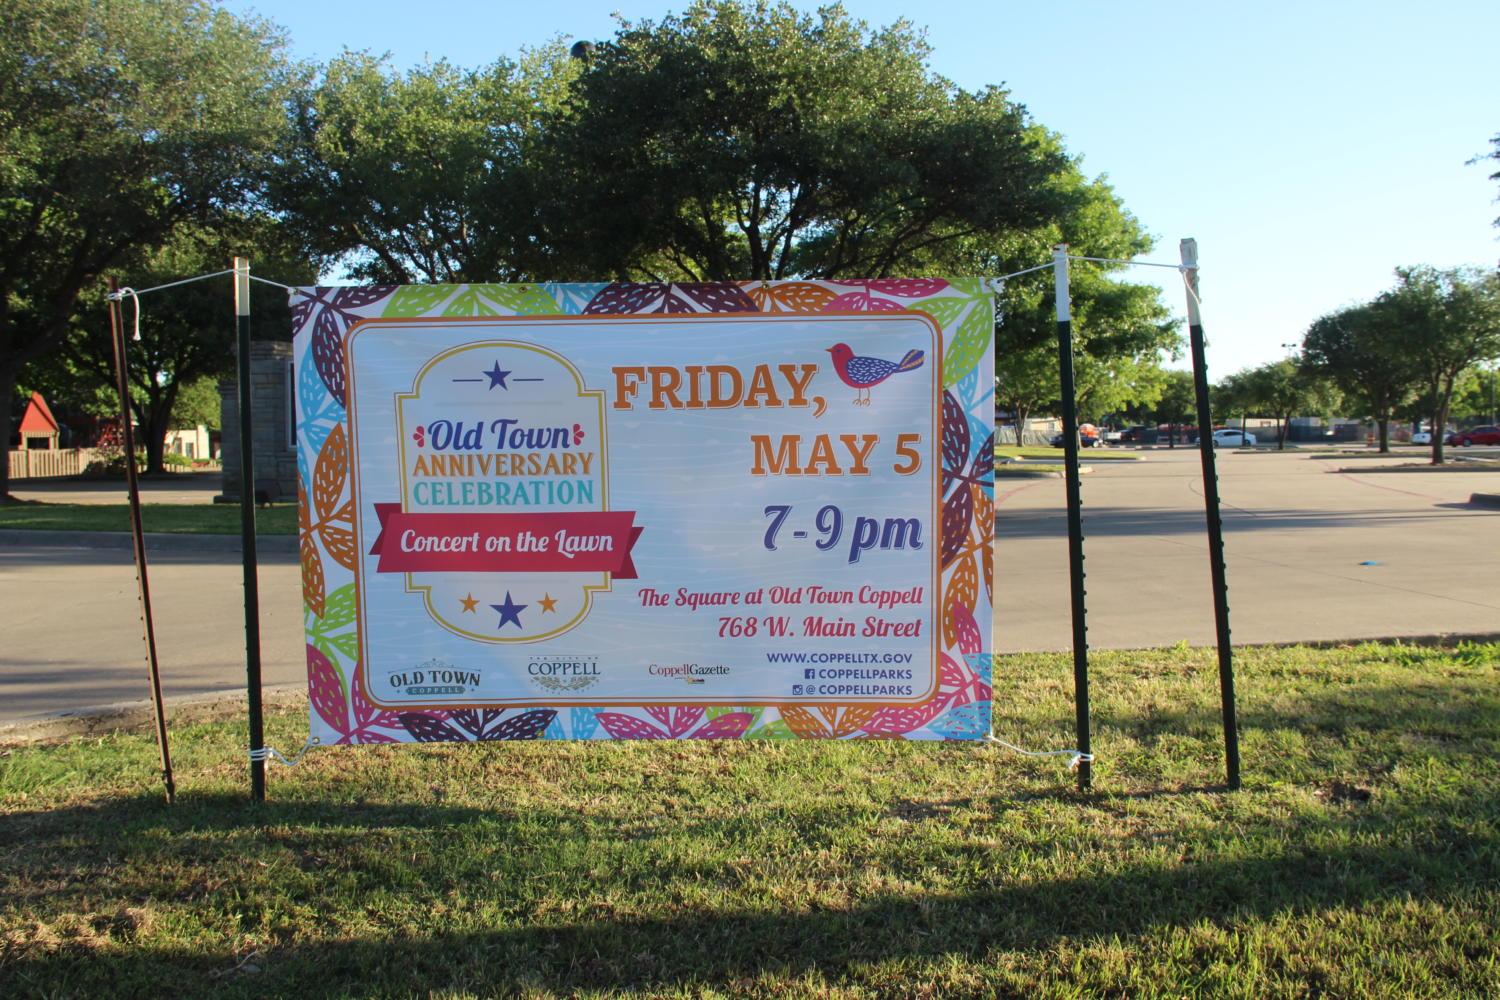 The Coppell Concert on the Lawn is set to be filled with live music, food and games. It will take place tomorrow in the Square of Old Town Coppell, located at 768 W. Main Street, from 7-9 p.m.